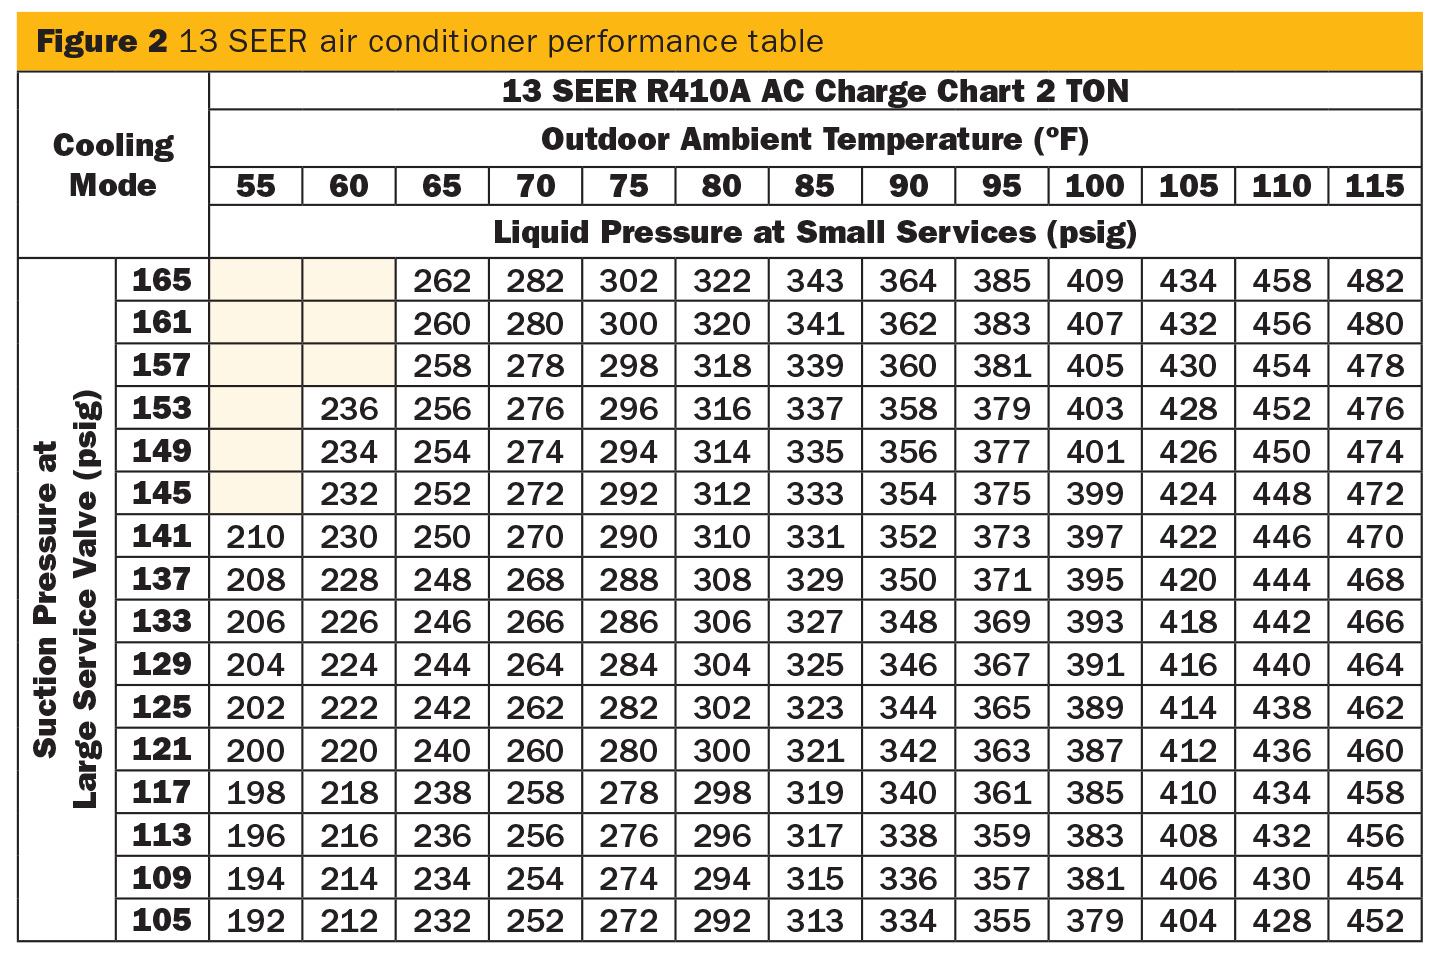 Figure 2 13 SEER air conditioner performance table 